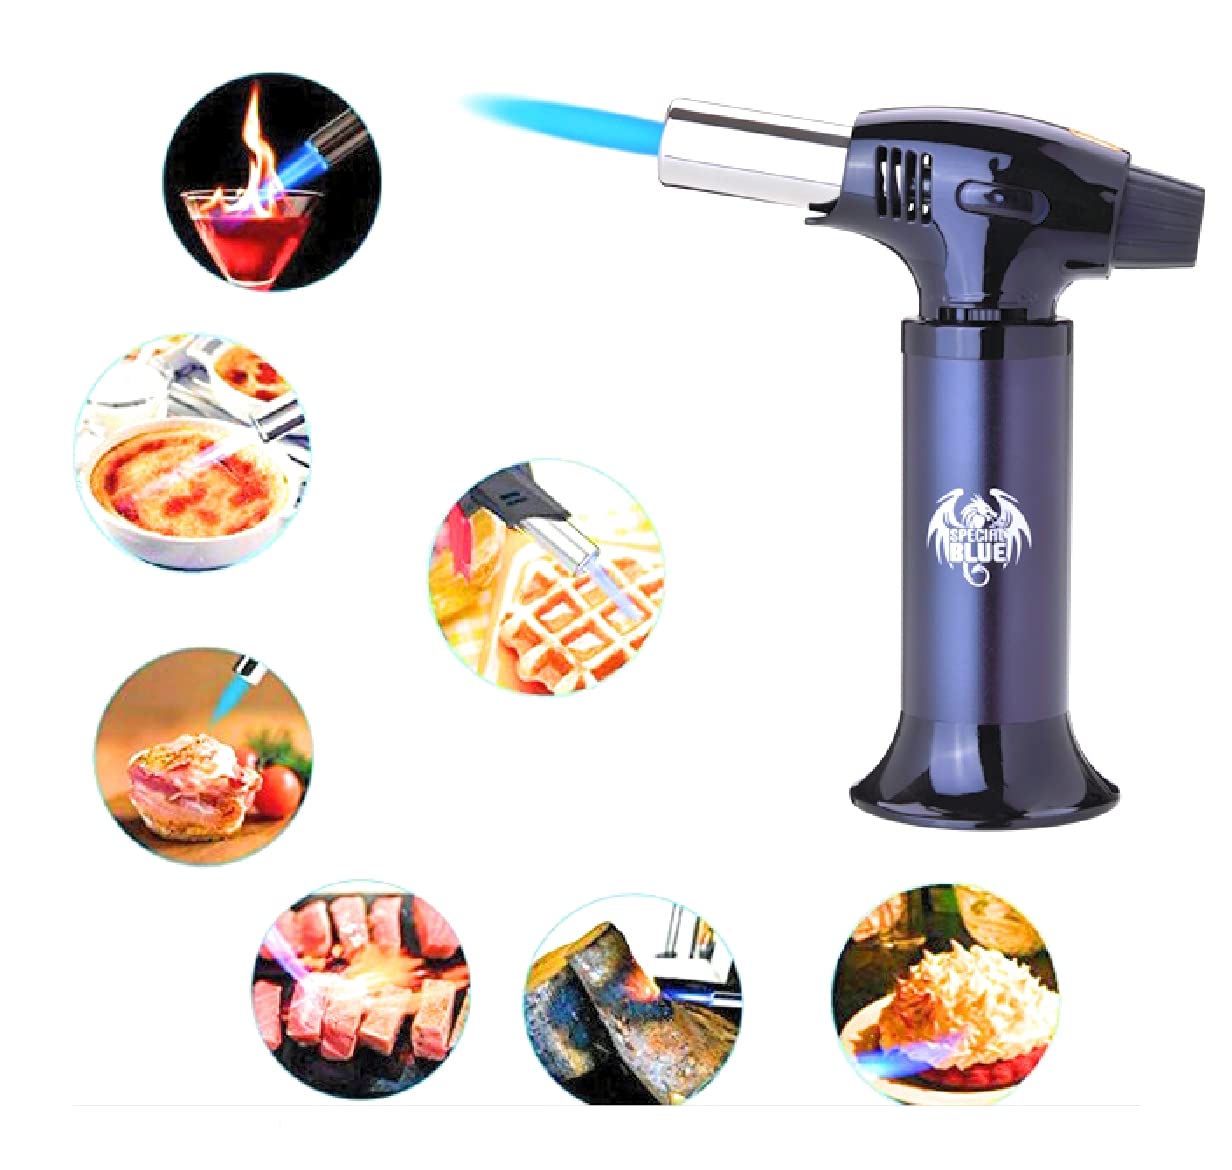 Kitchen Torch, blow torch -Special Blue Refillable Butane Torch With Safety Lock & Adjustable Flame and Fuel gauge - Culinary Torch, Creme Brulée Torch for Cooking Food, Baking, BBQ (Black)